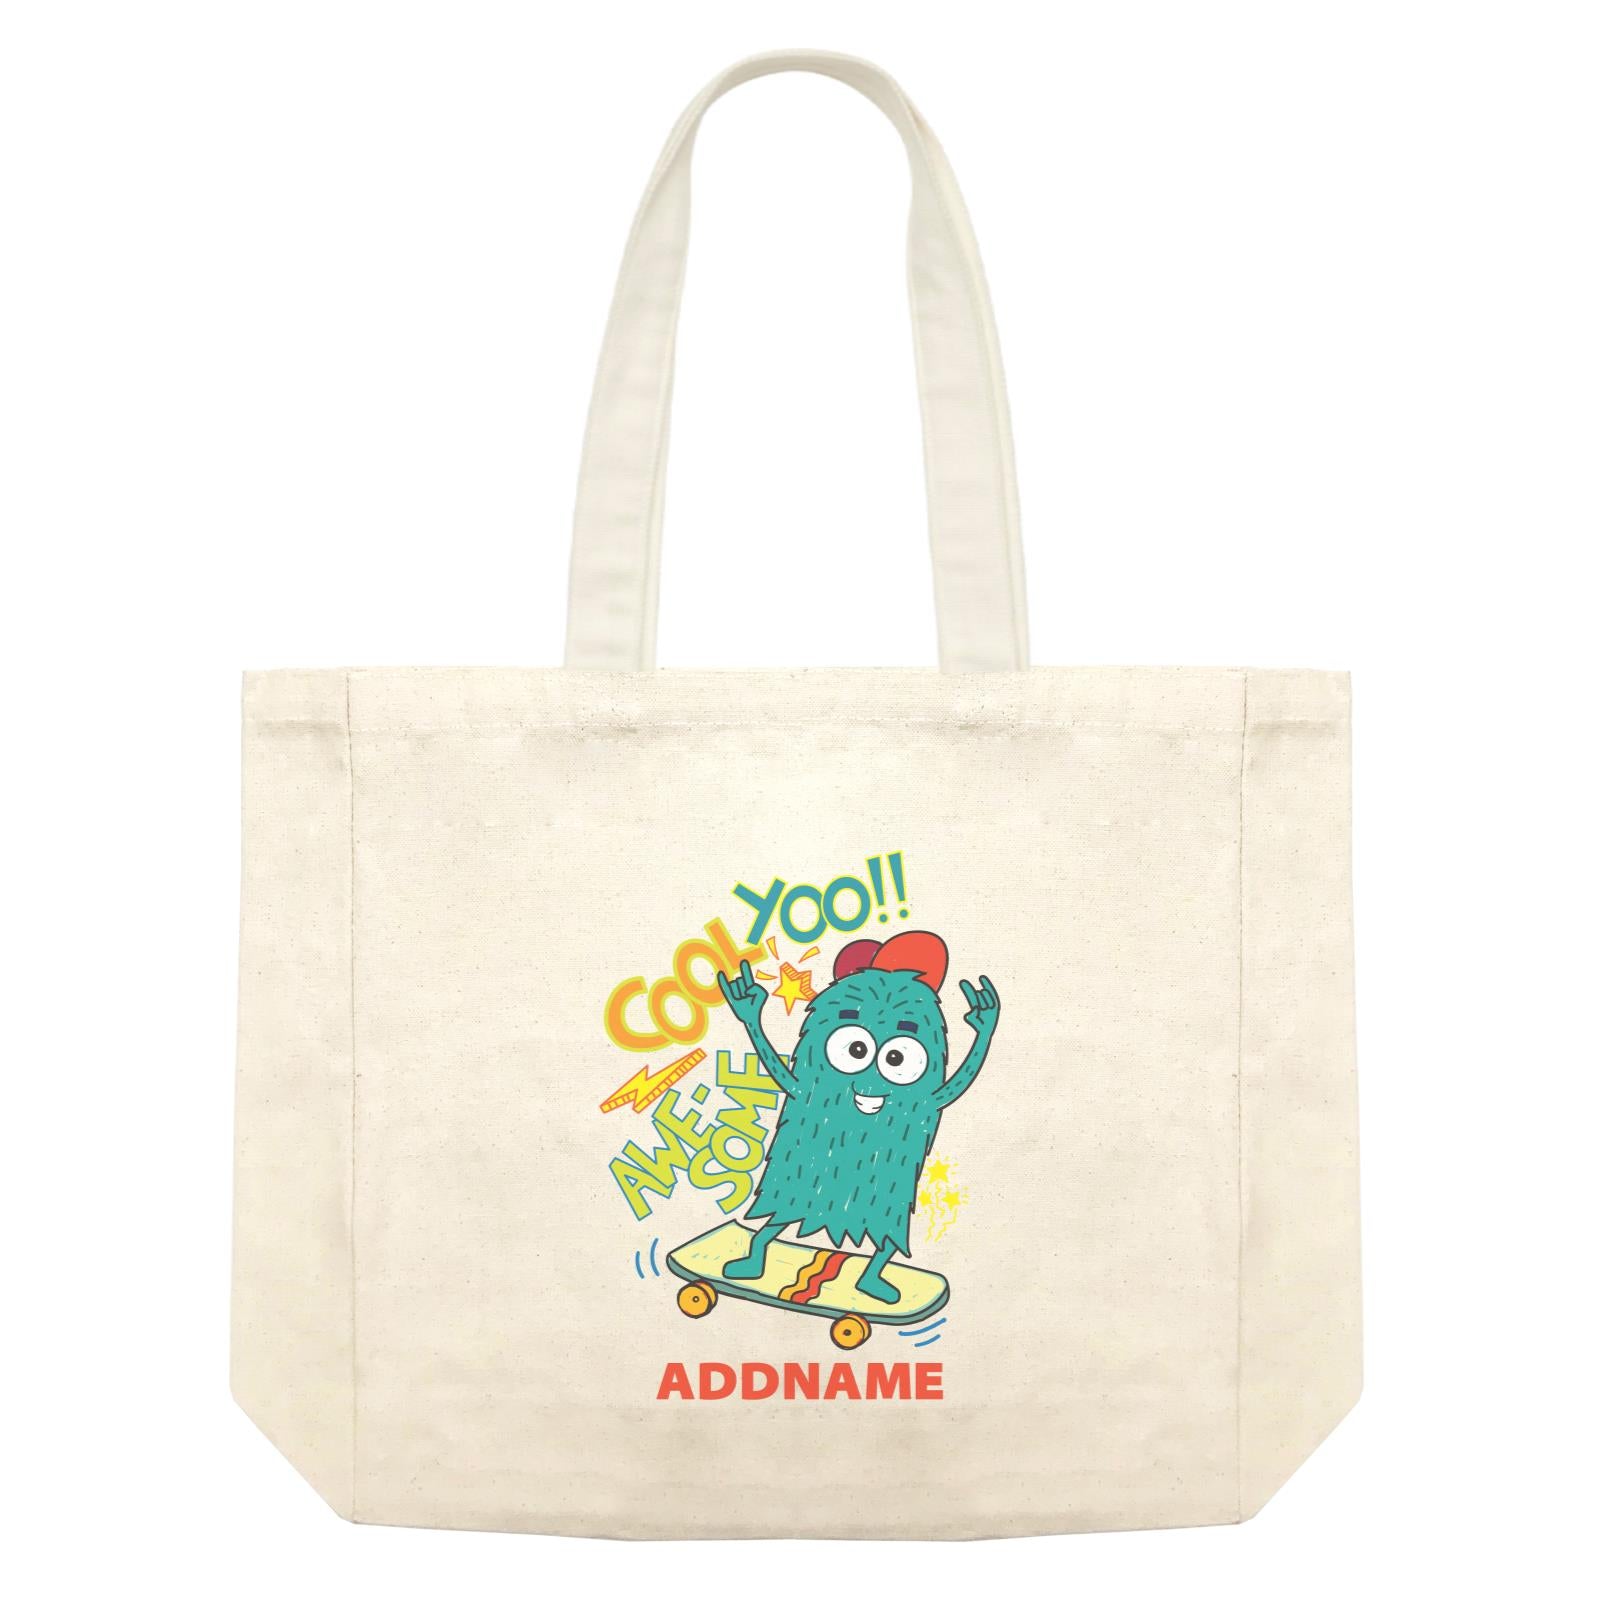 Cool Cute Monster Cool Yoo Awesome Skateboard Monster Addname Shopping Bag